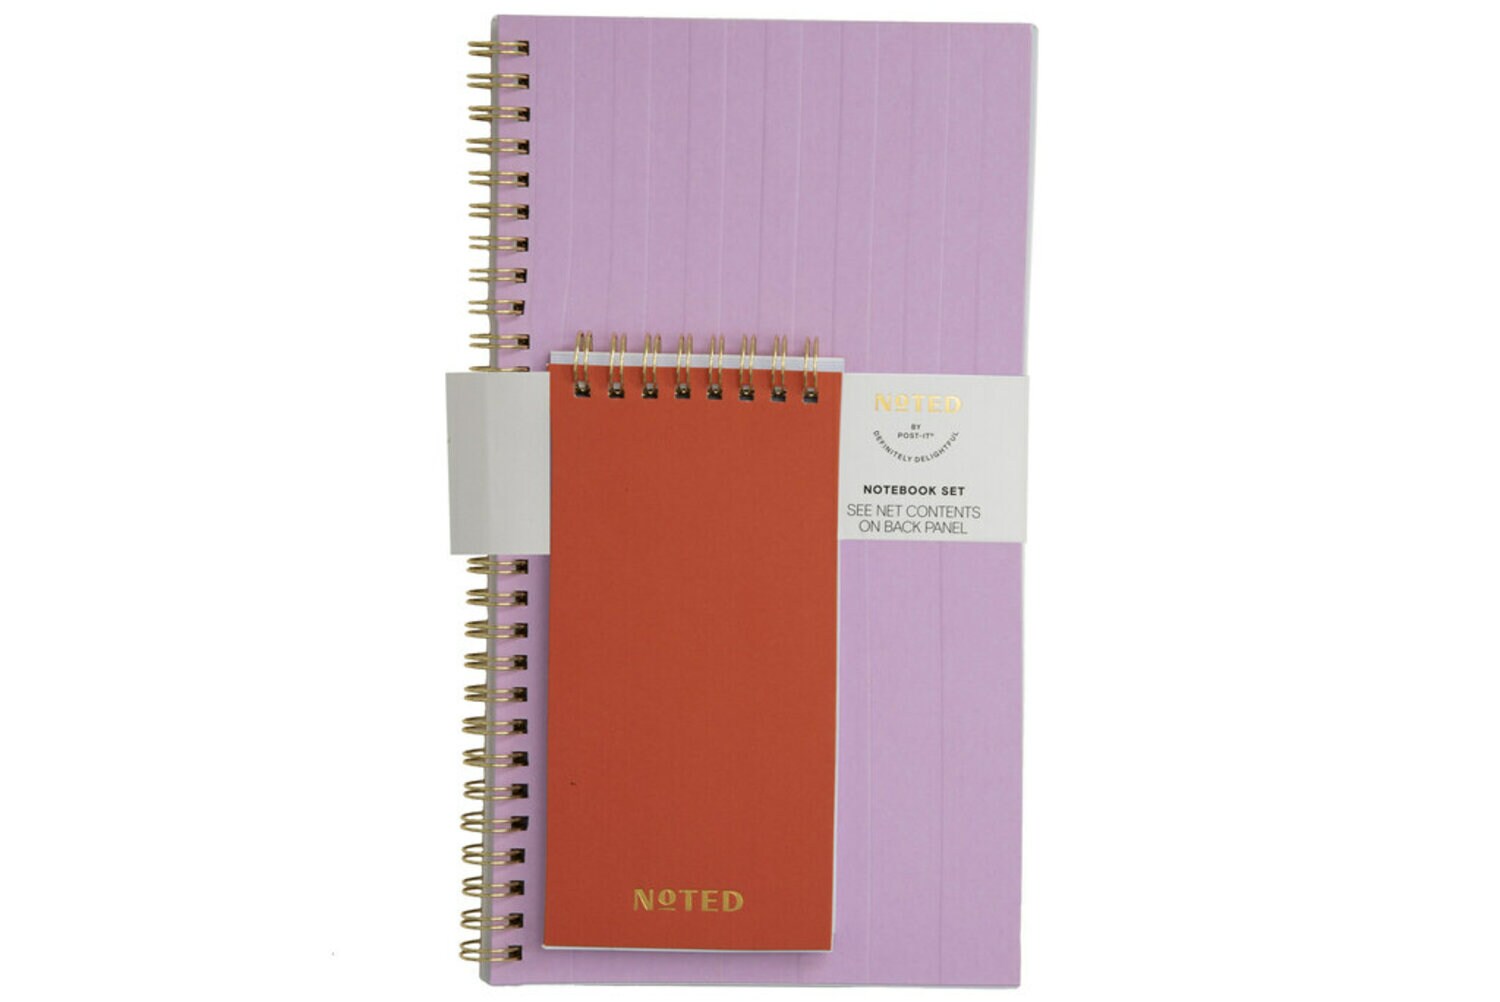 7100281870 - Post-it Notebook Set NTD6-NBSET-2, 3 in x 6 in (76 mm x 152 mm) 150 pages and 5.5 in x 10 in (139.7 mm x 254 mm) 150 pages